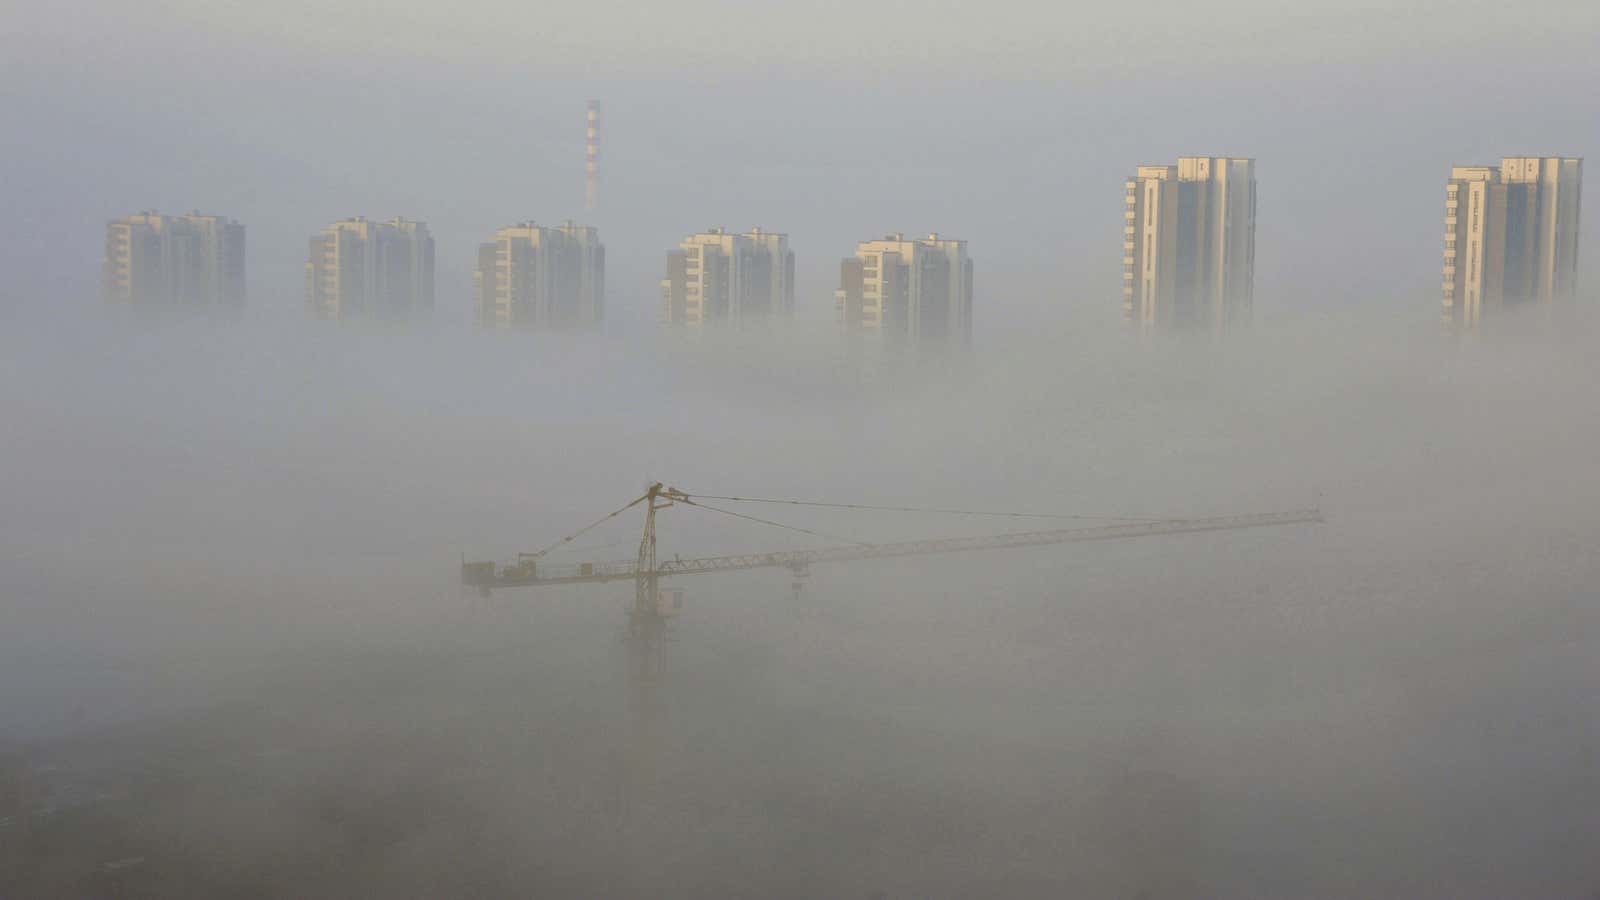 China’s housing prices are truly sky-high.